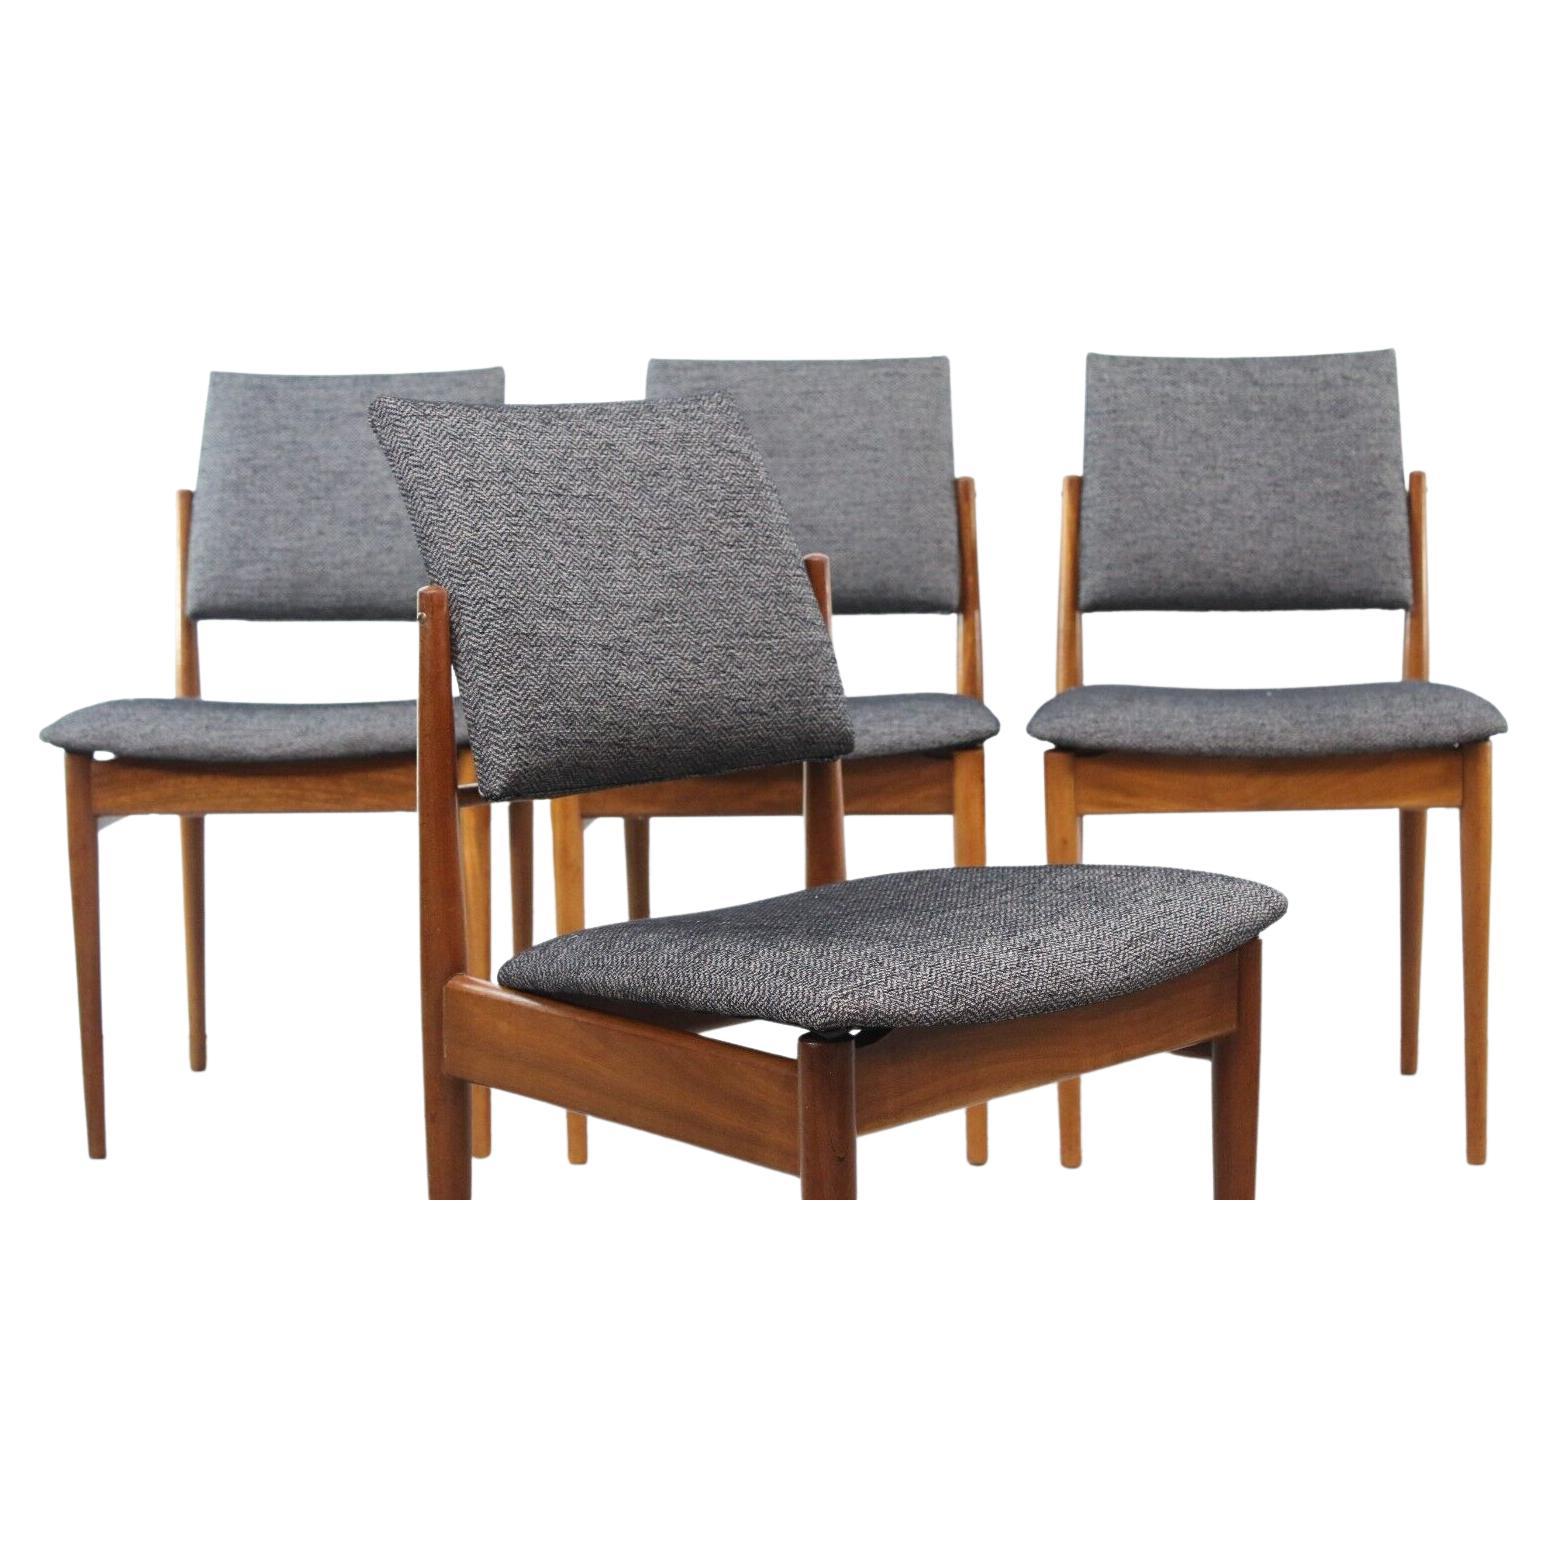 Four Archie Shine Midcentury Dining Chairs For Sale